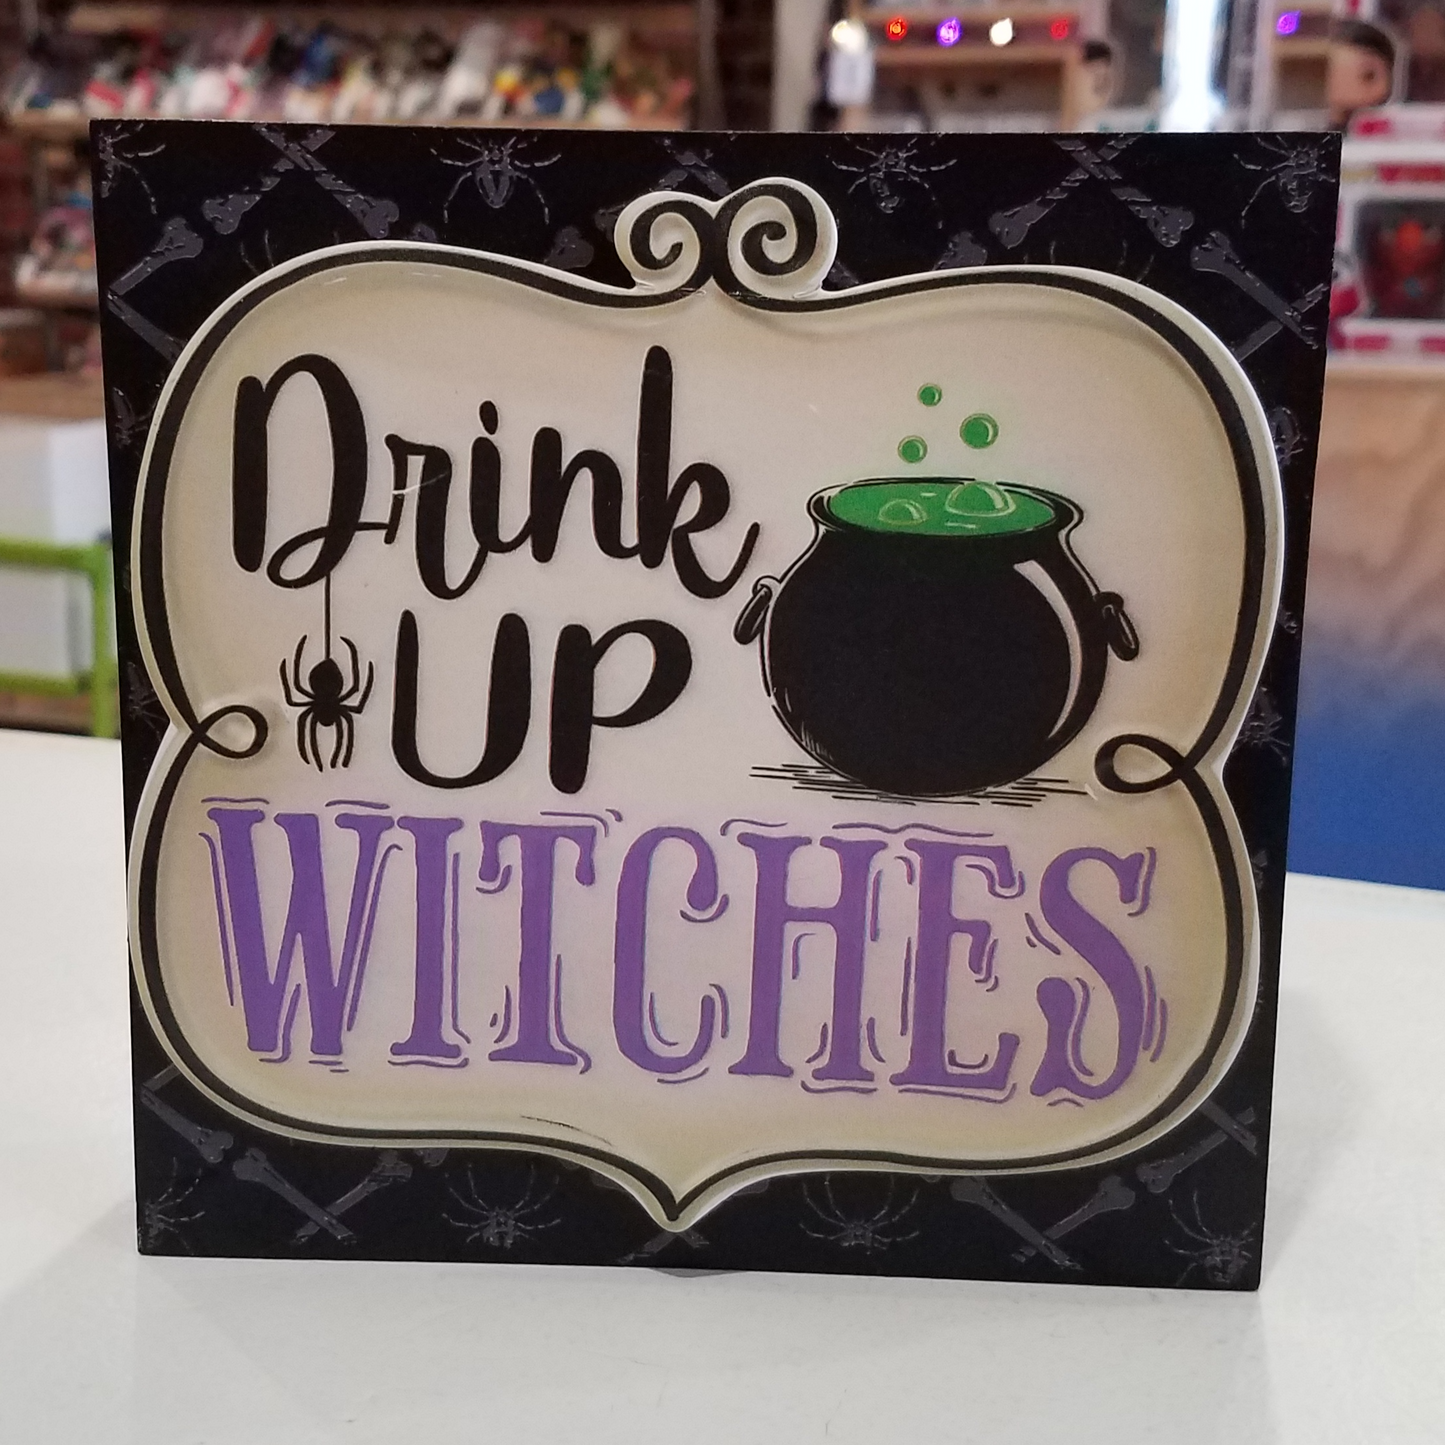 Halloween Sign - Drink Up Witches!